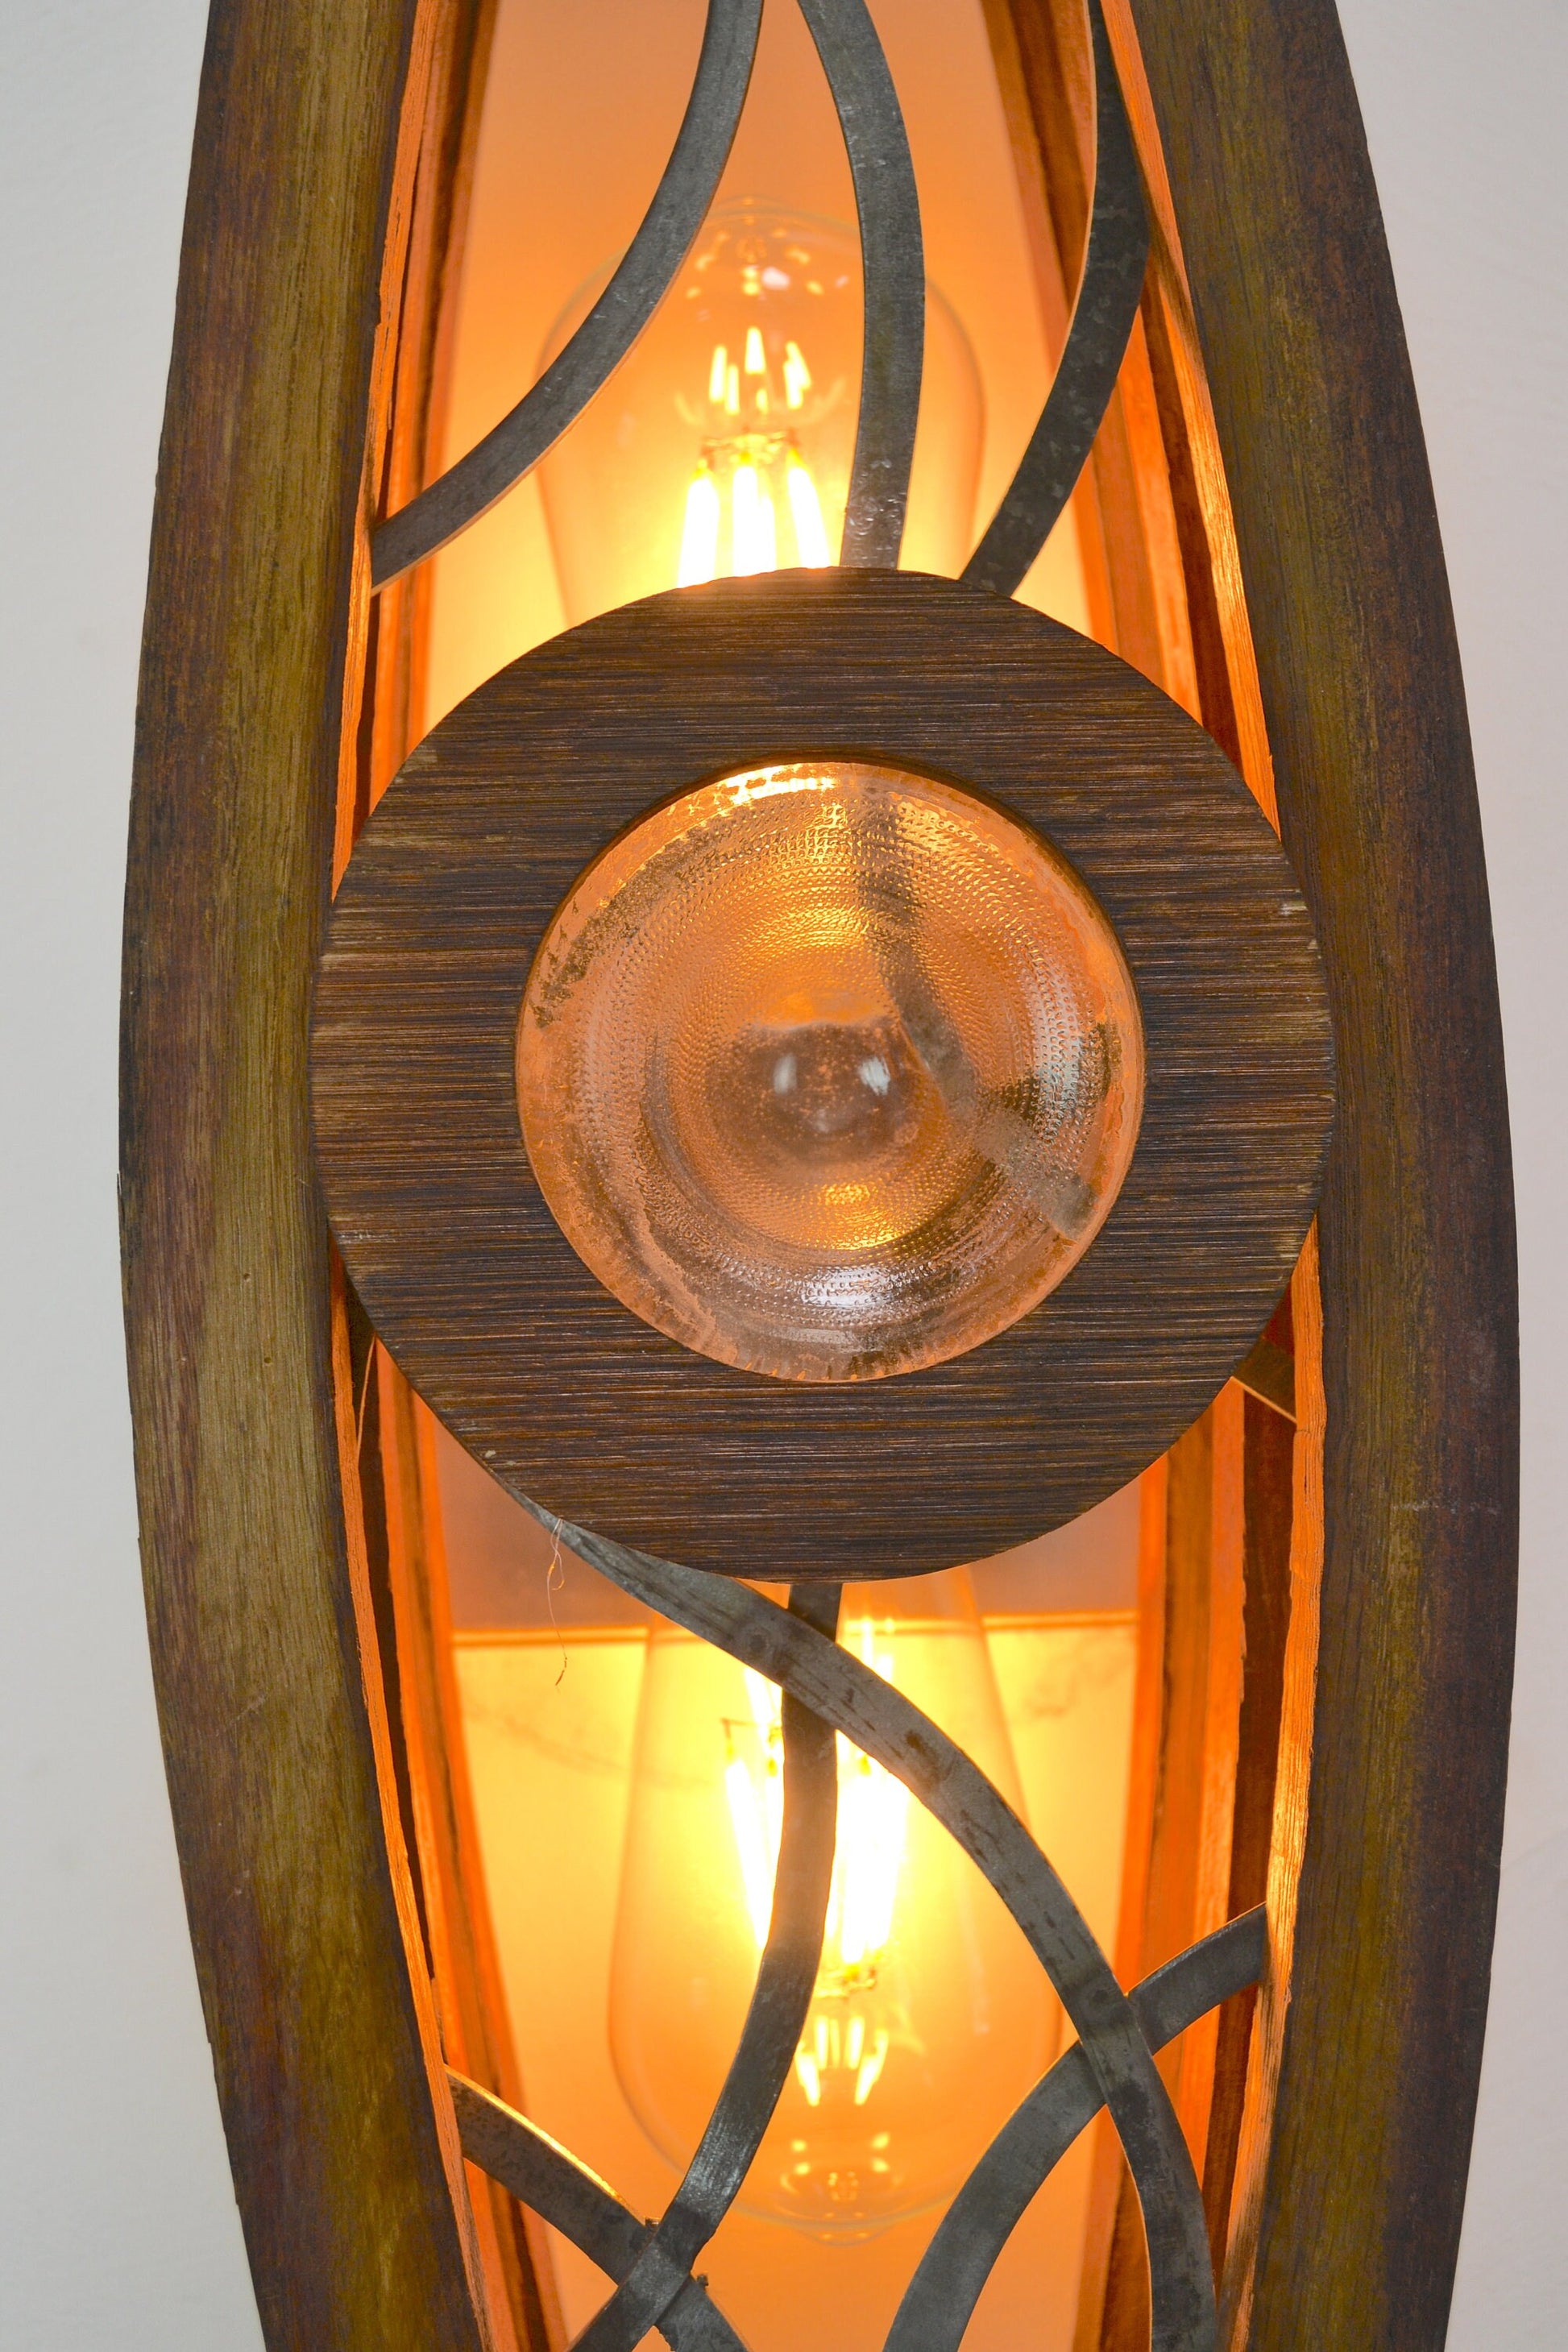 Wine Barrel Wall Sconce - Pestana - Made from Retired California wine barrels. 100% Recycled!